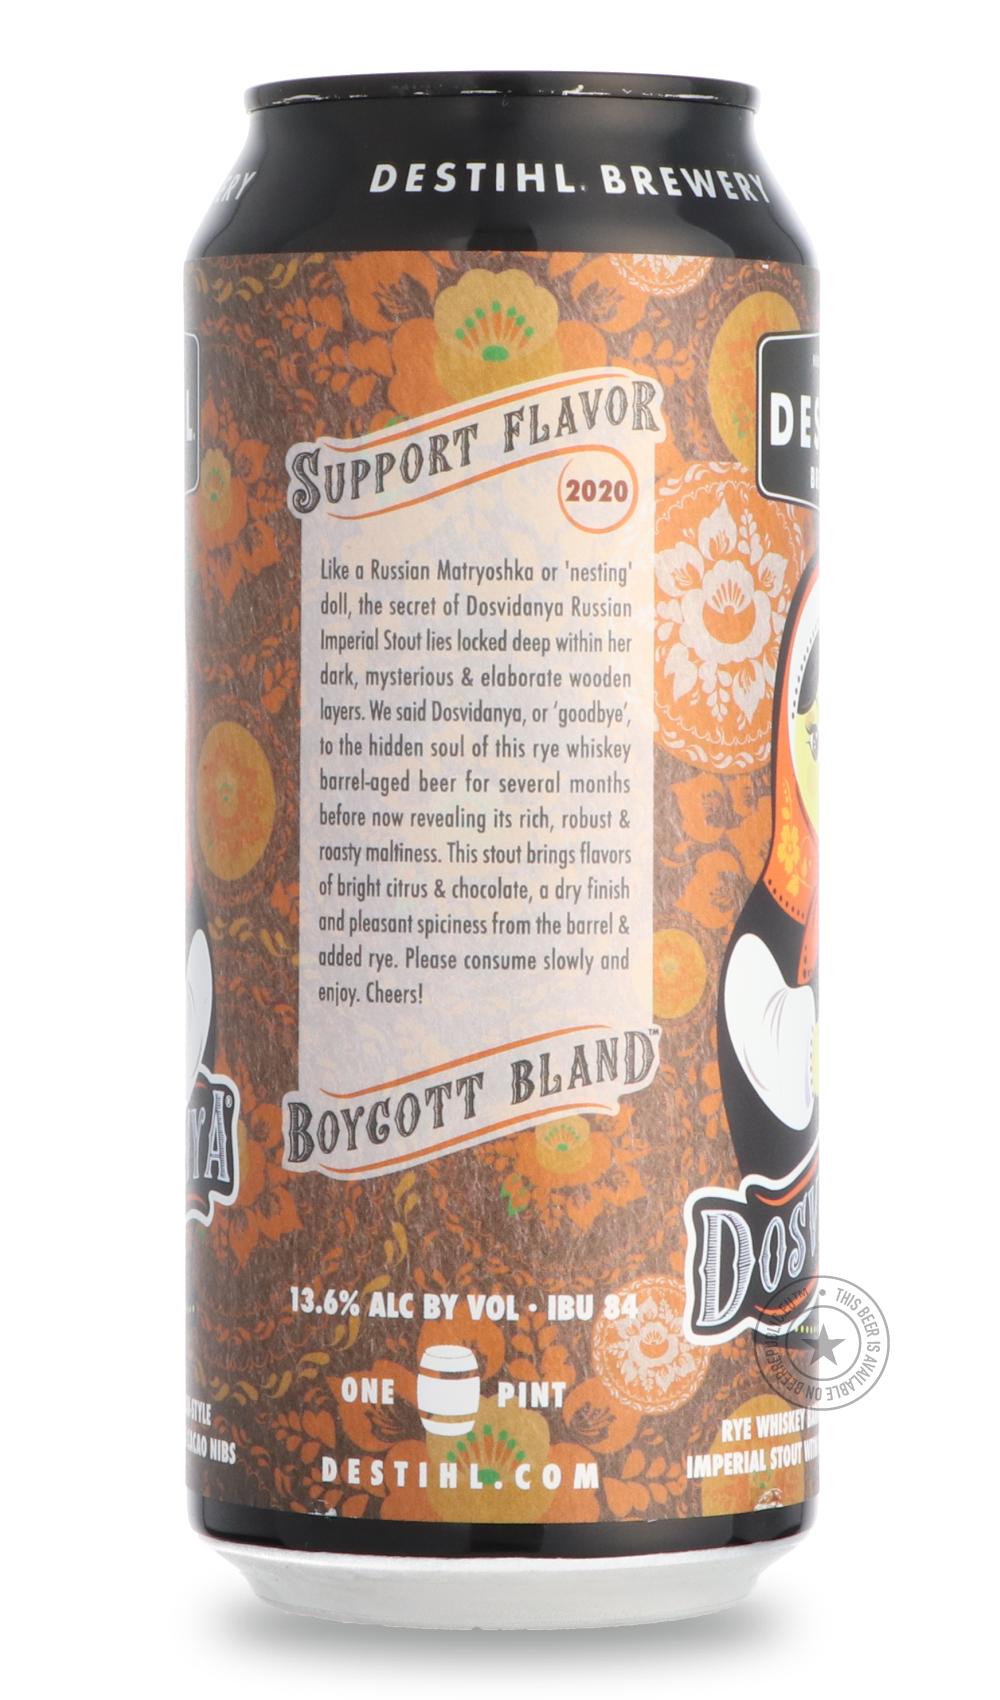 -Destihl- Dosvidanya Orange Chocolate Rye 2020-Stout & Porter- Only @ Beer Republic - The best online beer store for American & Canadian craft beer - Buy beer online from the USA and Canada - Bier online kopen - Amerikaans bier kopen - Craft beer store - Craft beer kopen - Amerikanisch bier kaufen - Bier online kaufen - Acheter biere online - IPA - Stout - Porter - New England IPA - Hazy IPA - Imperial Stout - Barrel Aged - Barrel Aged Imperial Stout - Brown - Dark beer - Blond - Blonde - Pilsner - Lager - 